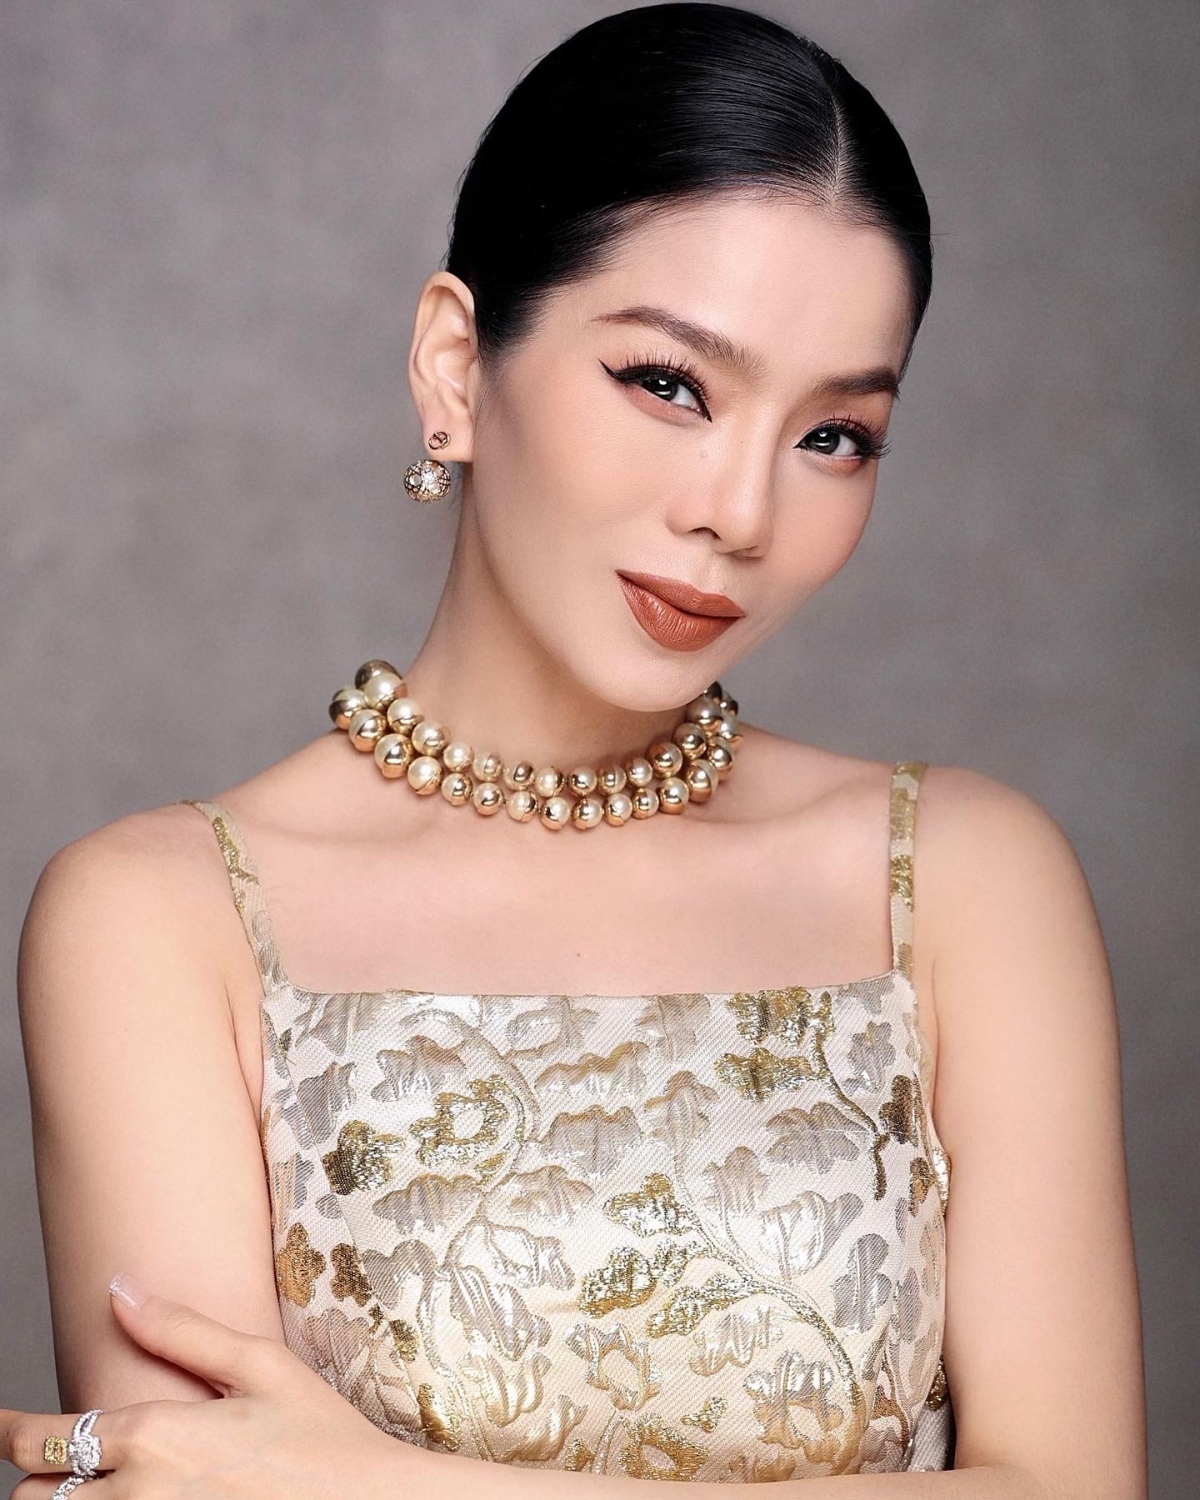 ca si le quyen ngoi ghe nong miss world viet nam 2022 hinh anh 1